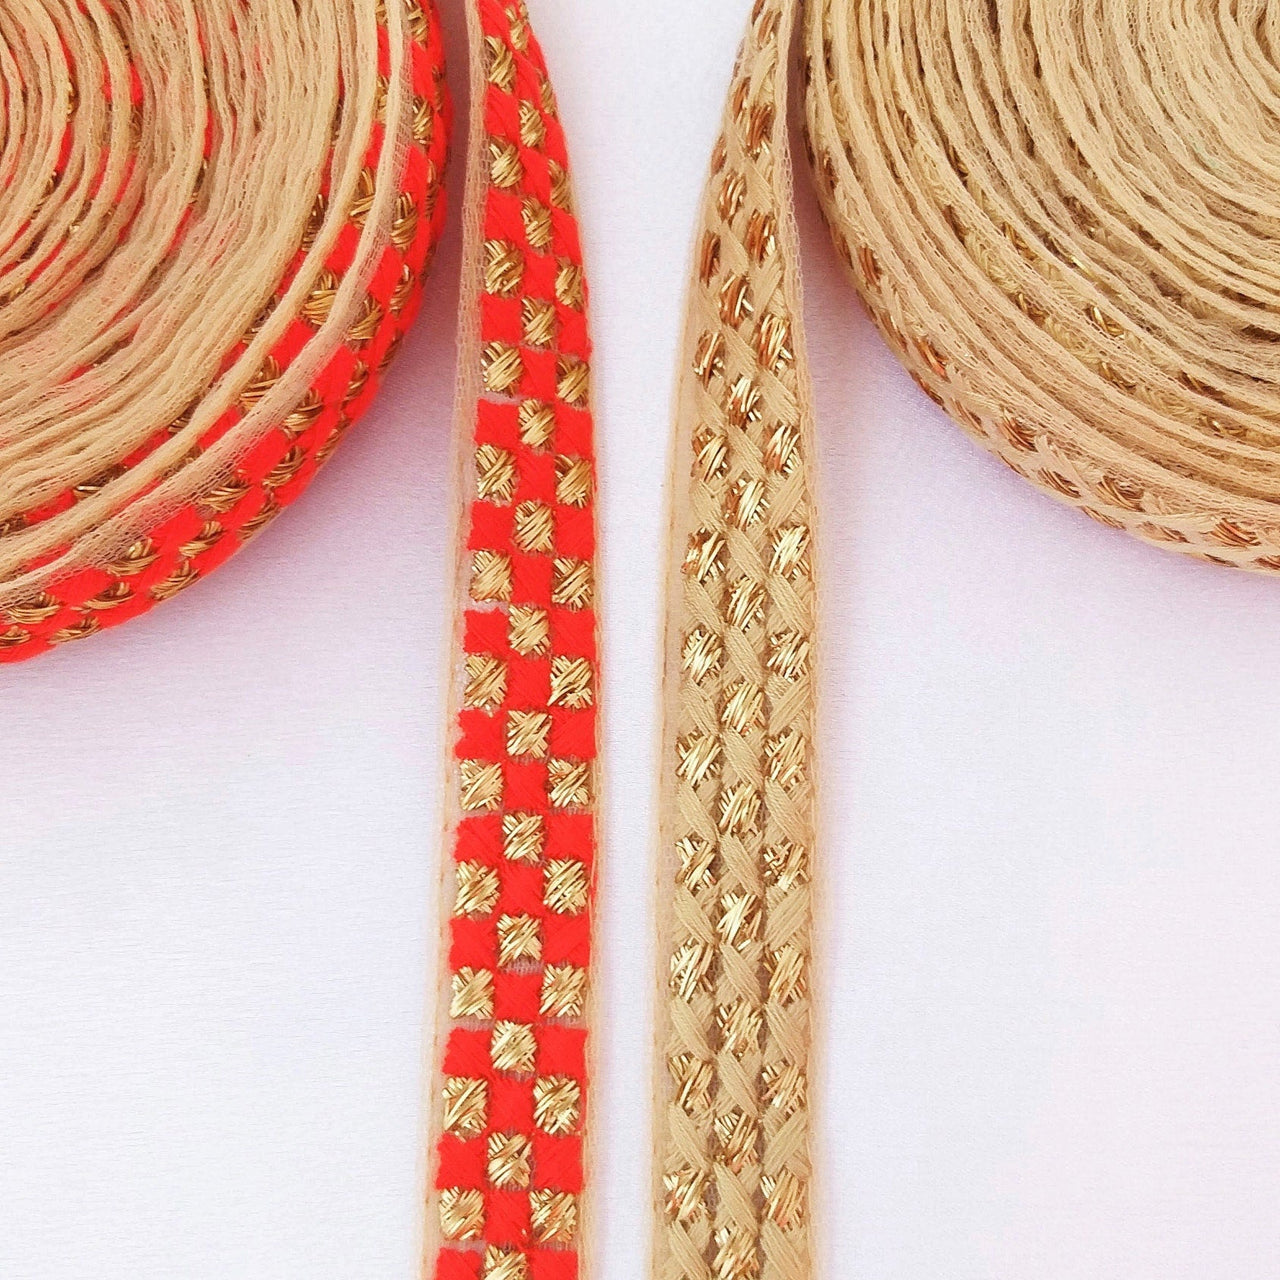 Beige Net Lace Trim With Beautiful  Brown / Red And Gold Embroidery, Approx. 20mm wide